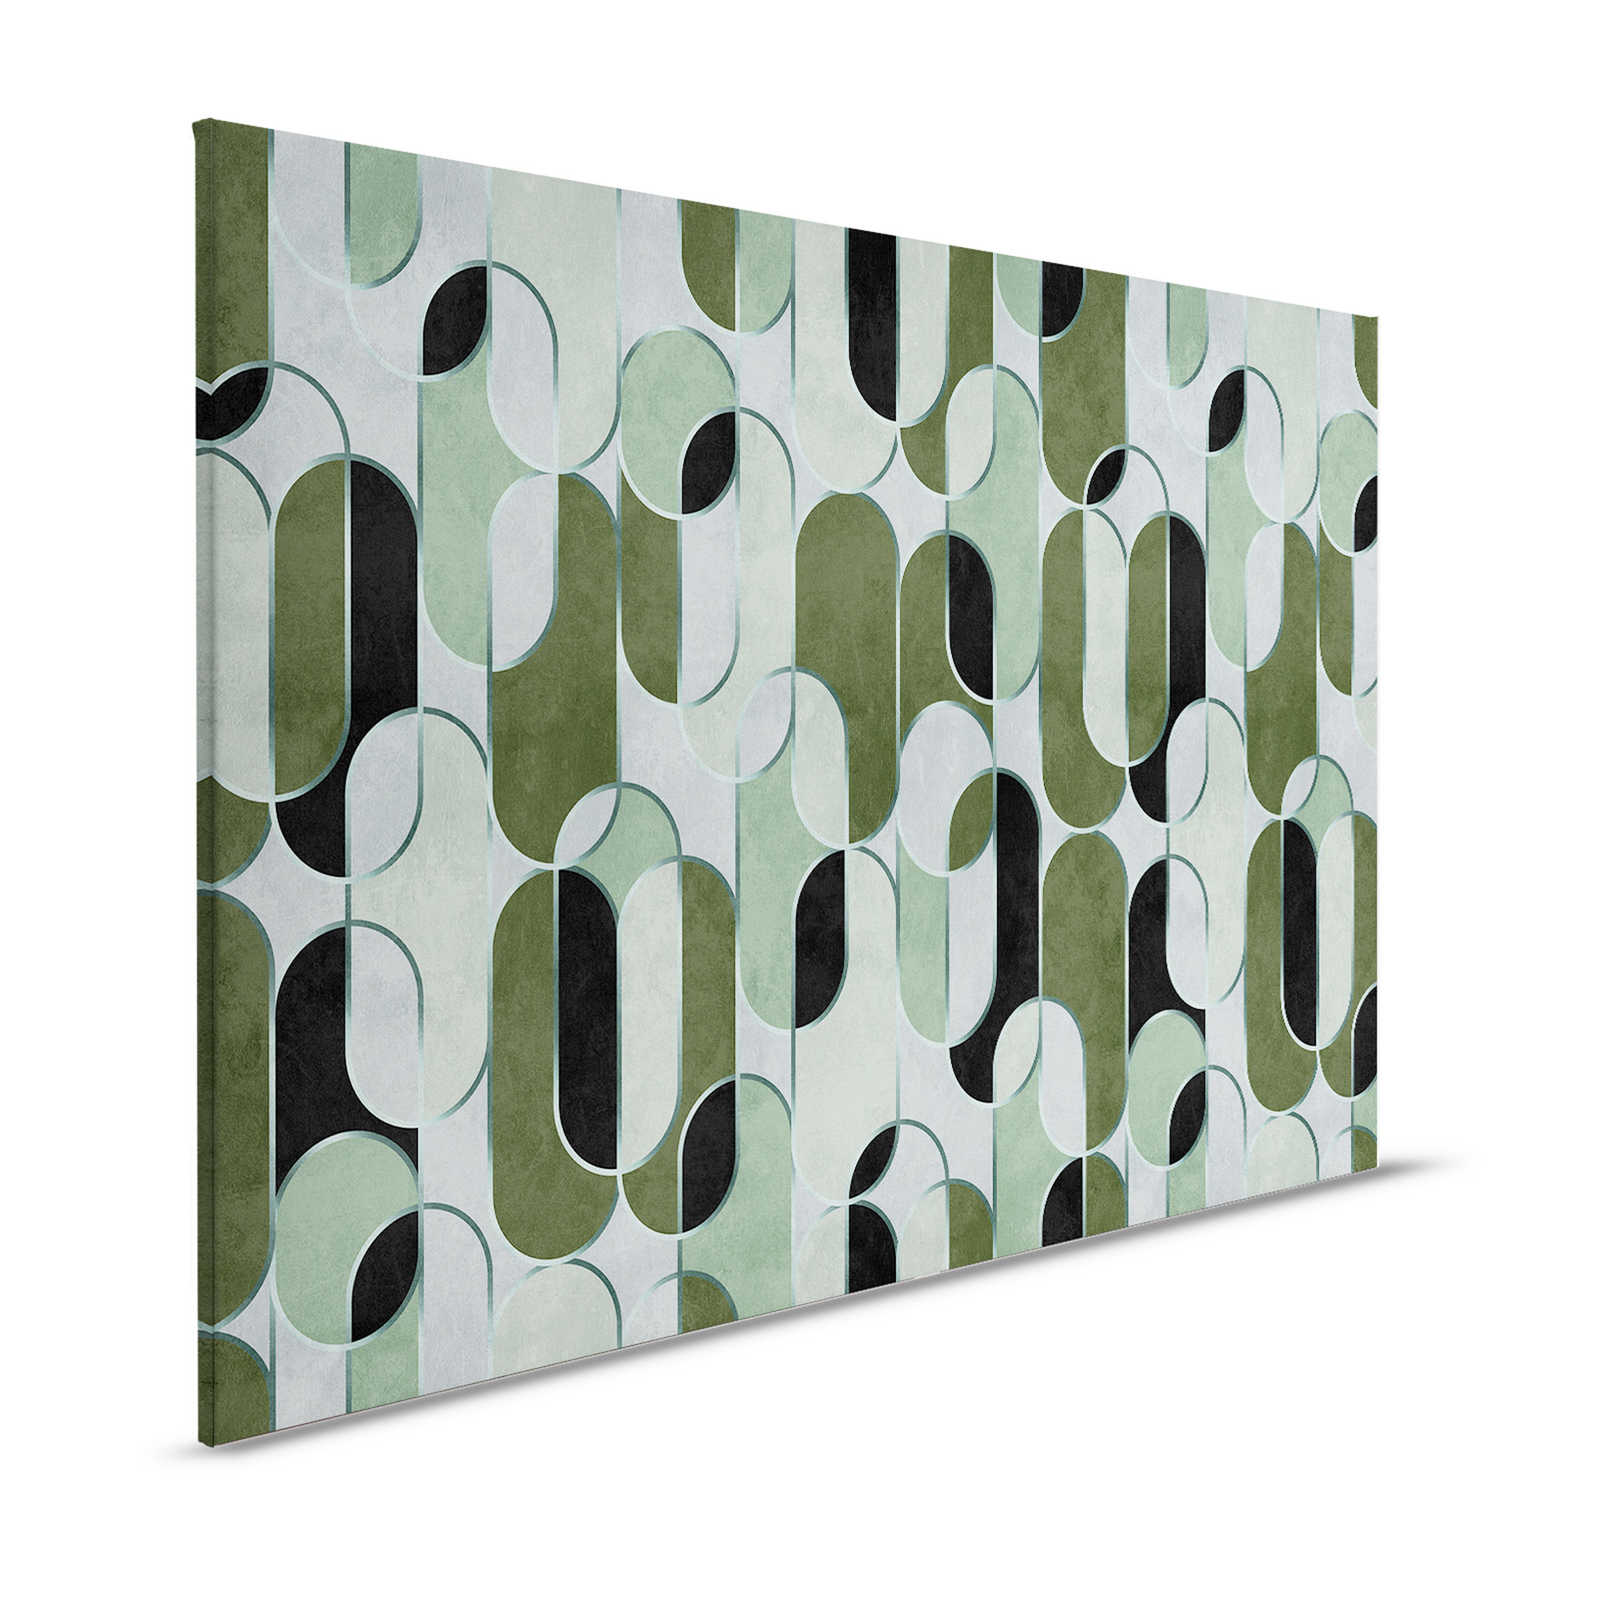 Ritz 4 - Green Canvas Painting 50s Retro Décor with Silver Accent - 1.20 m x 0.80 m
